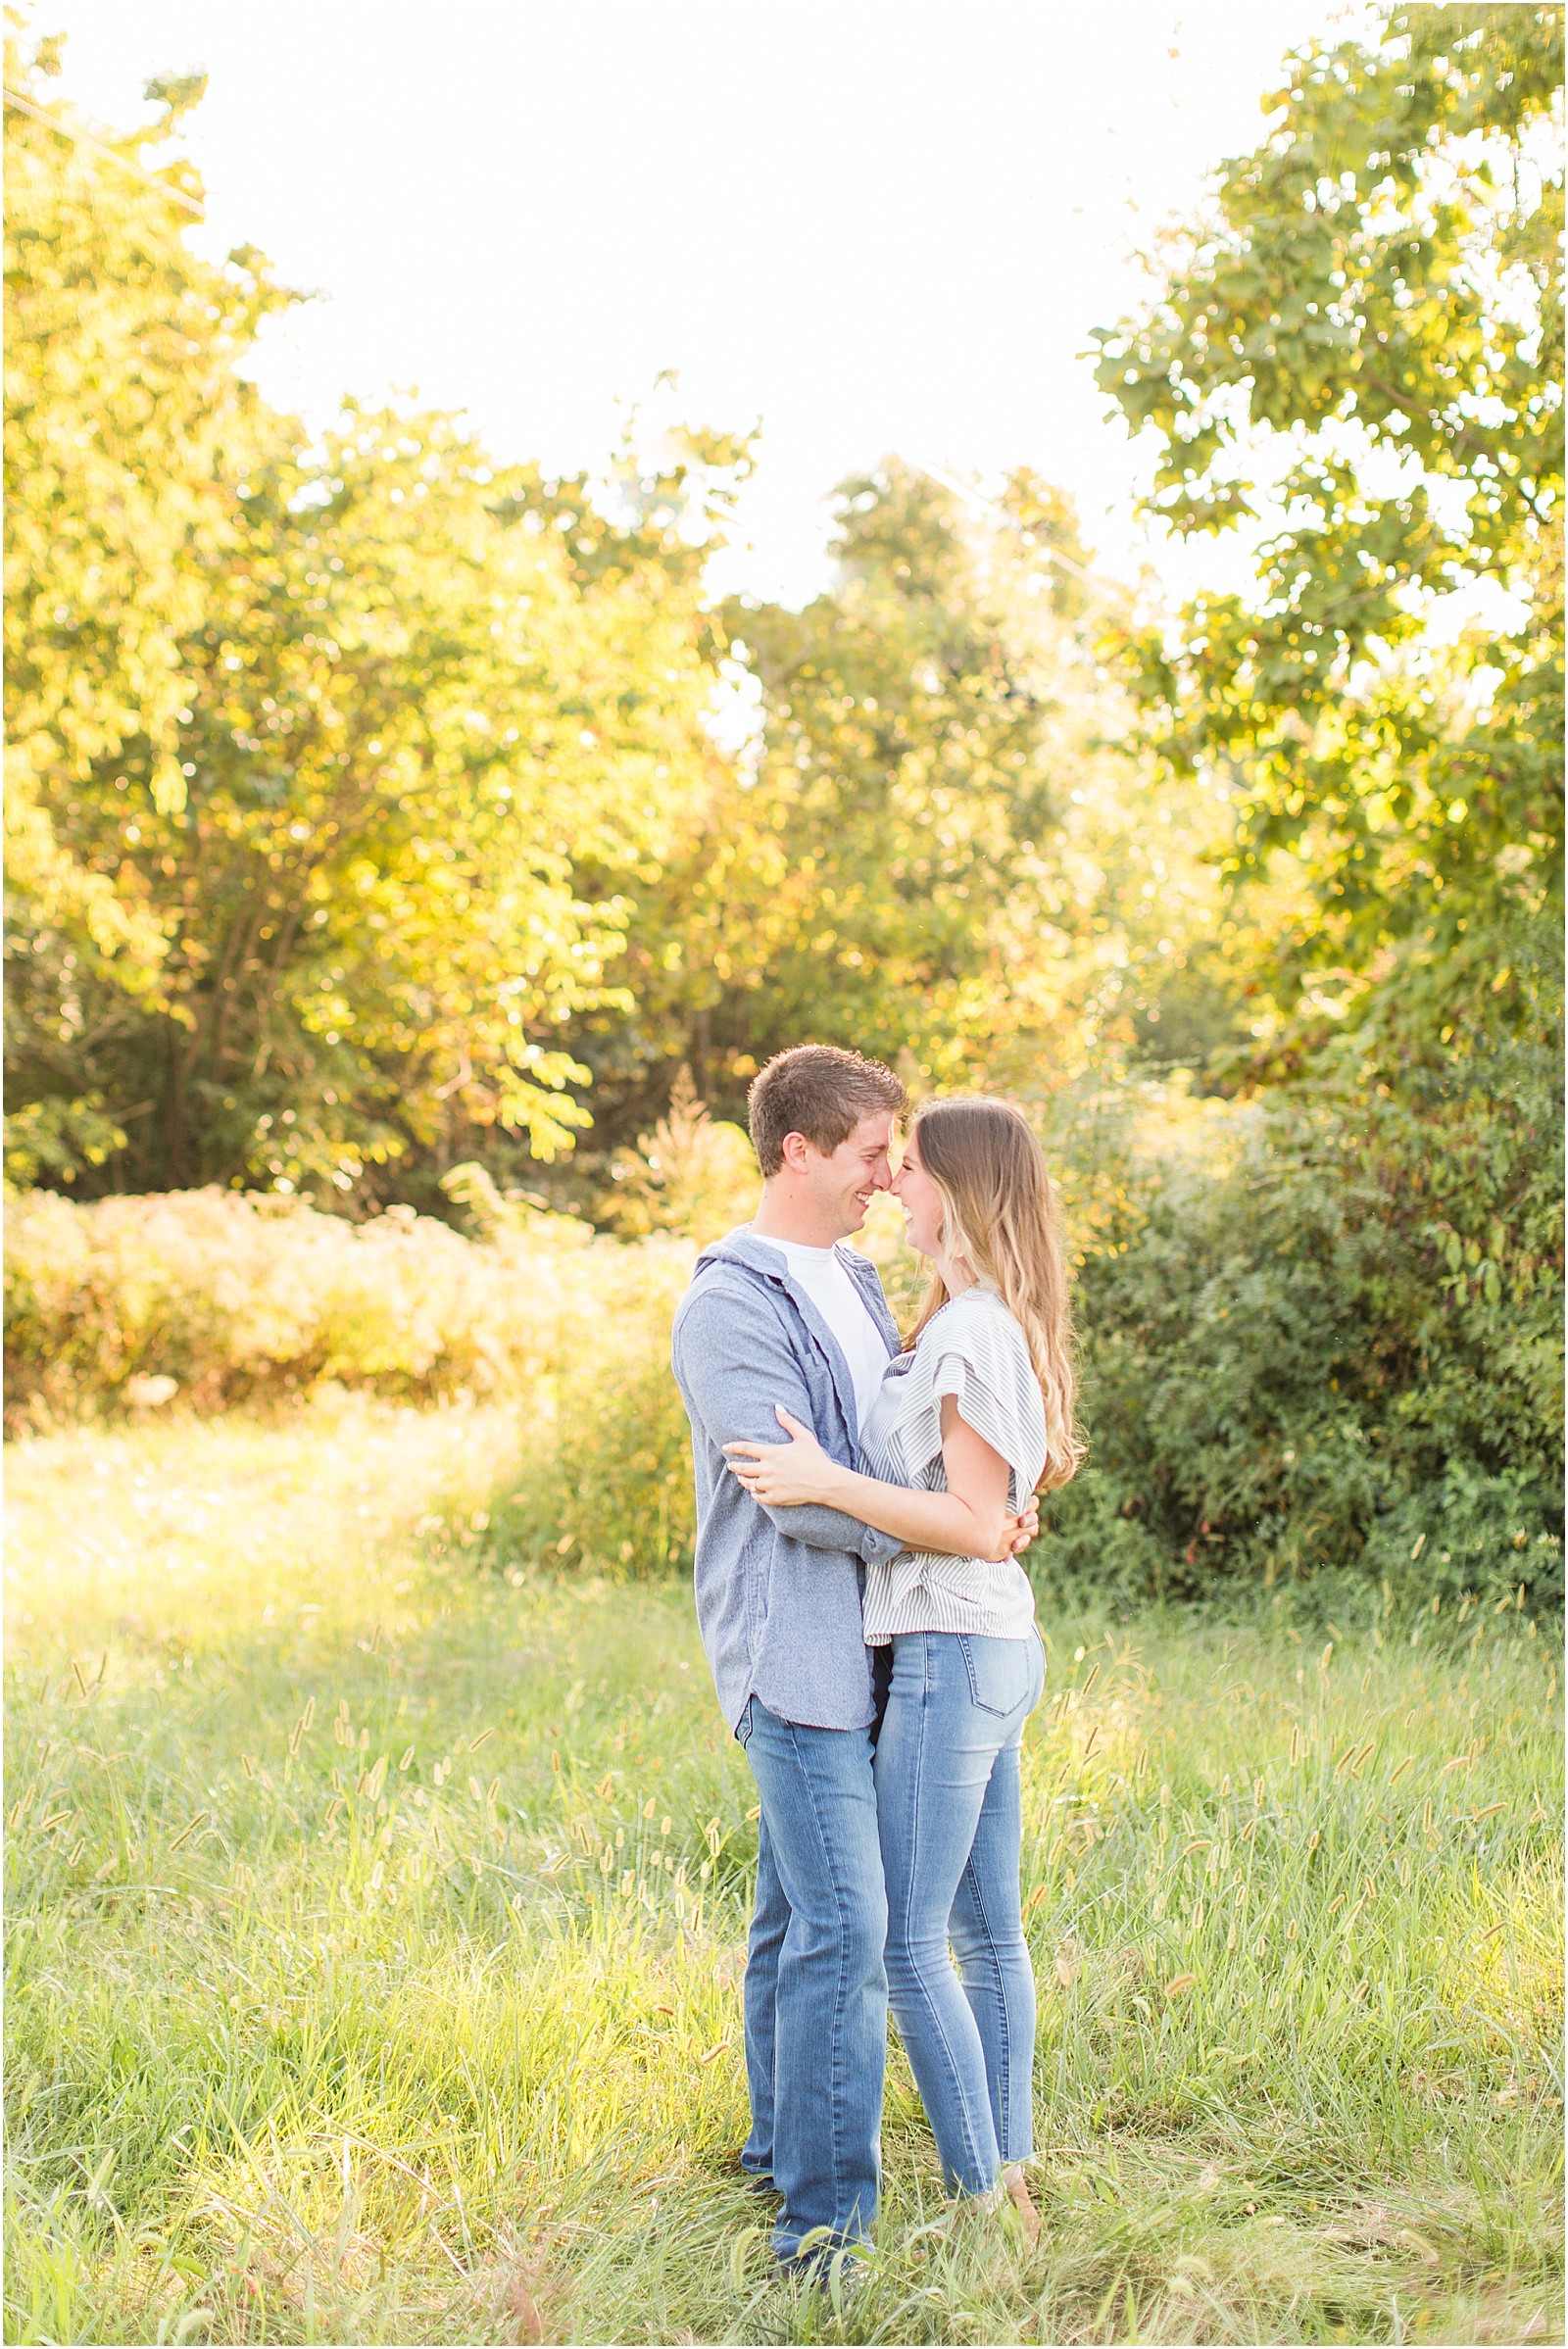 A Jasper Indiana Engagement Session | Tori and Kyle | Bret and Brandie Photography004.jpg